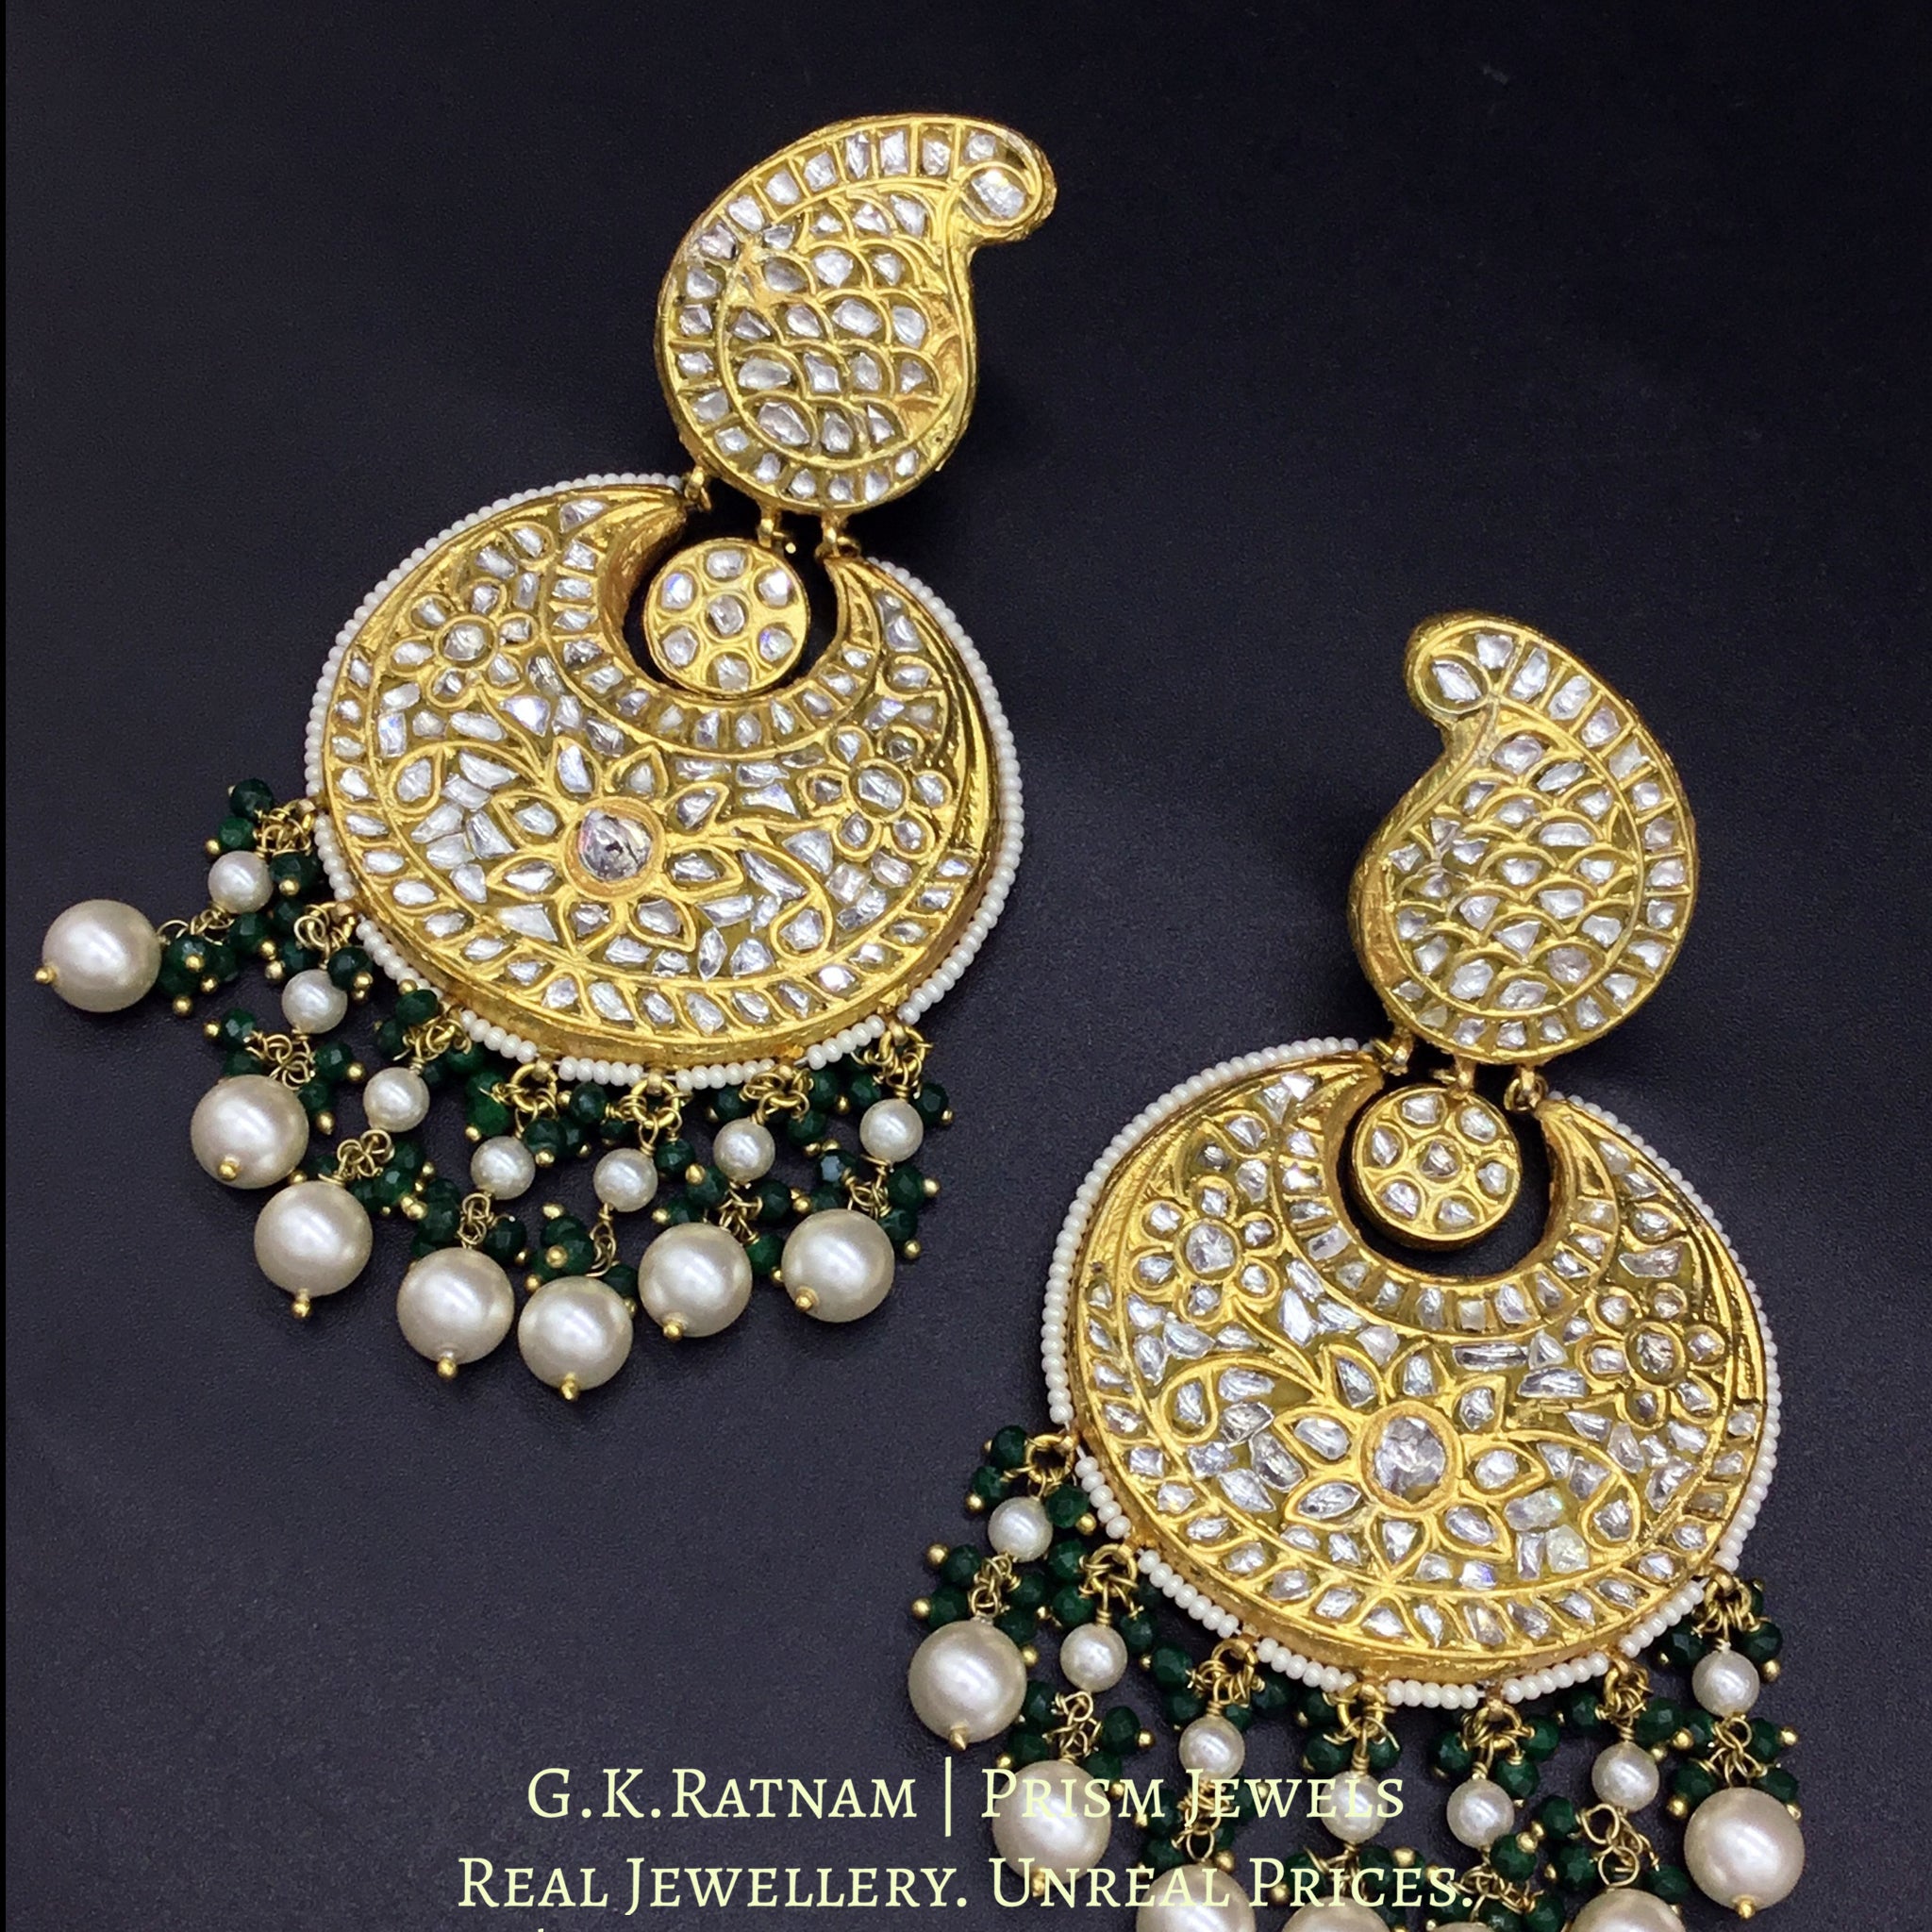 23k Gold and Diamond Polki Chand Bali Earring Pair with pearl chandeliers